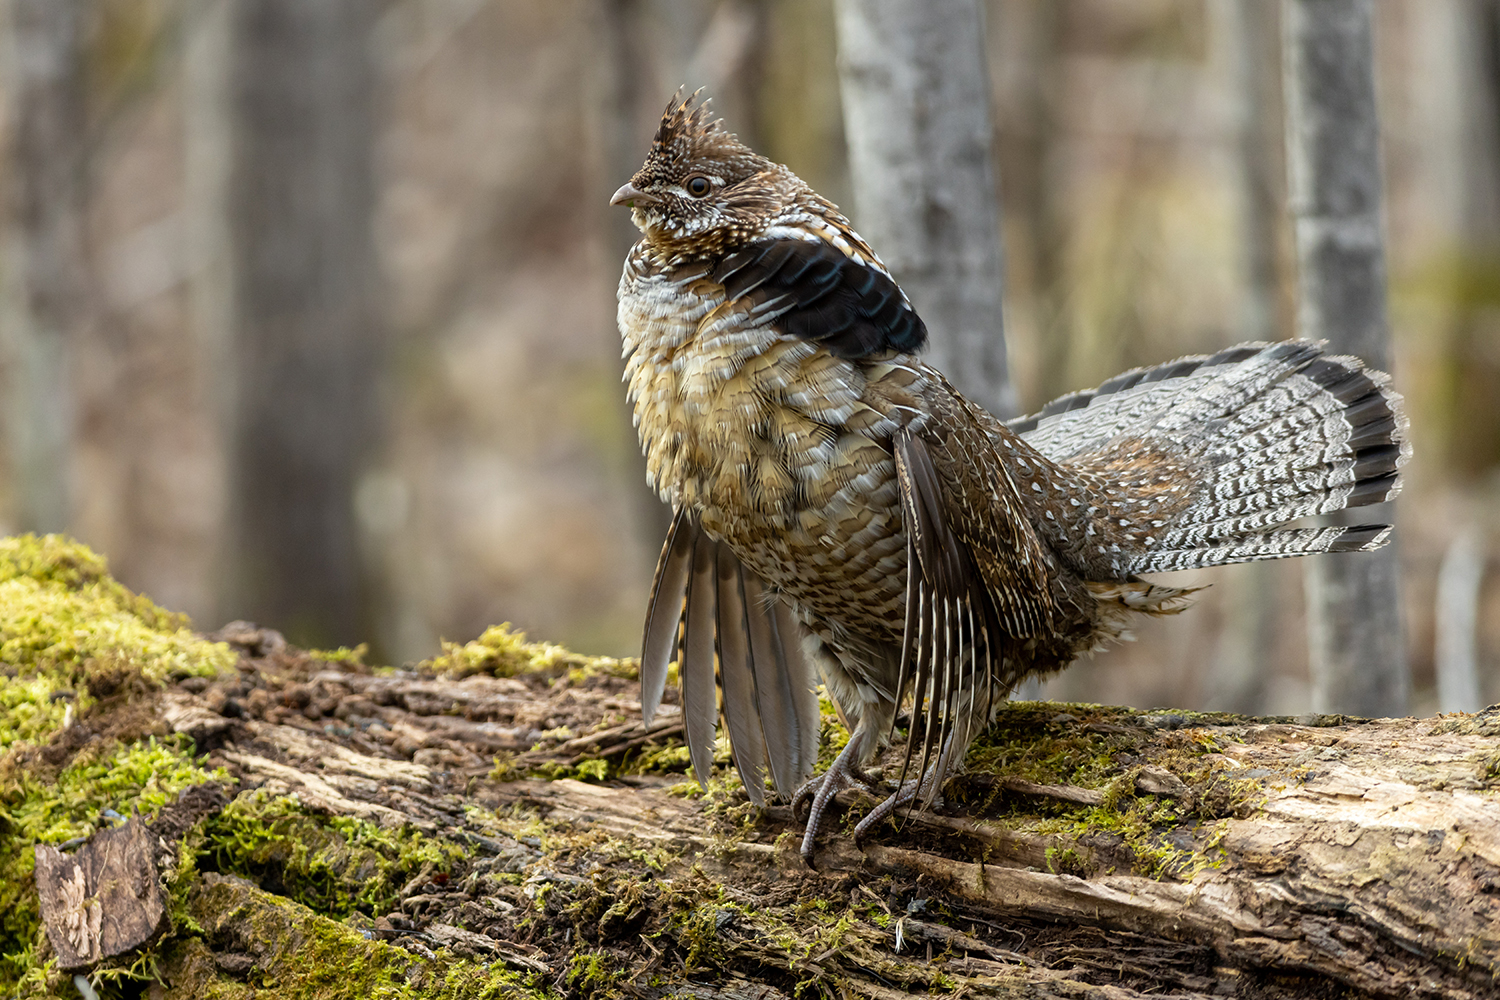 Ruffed Grouse male drumming on log taken in central MN